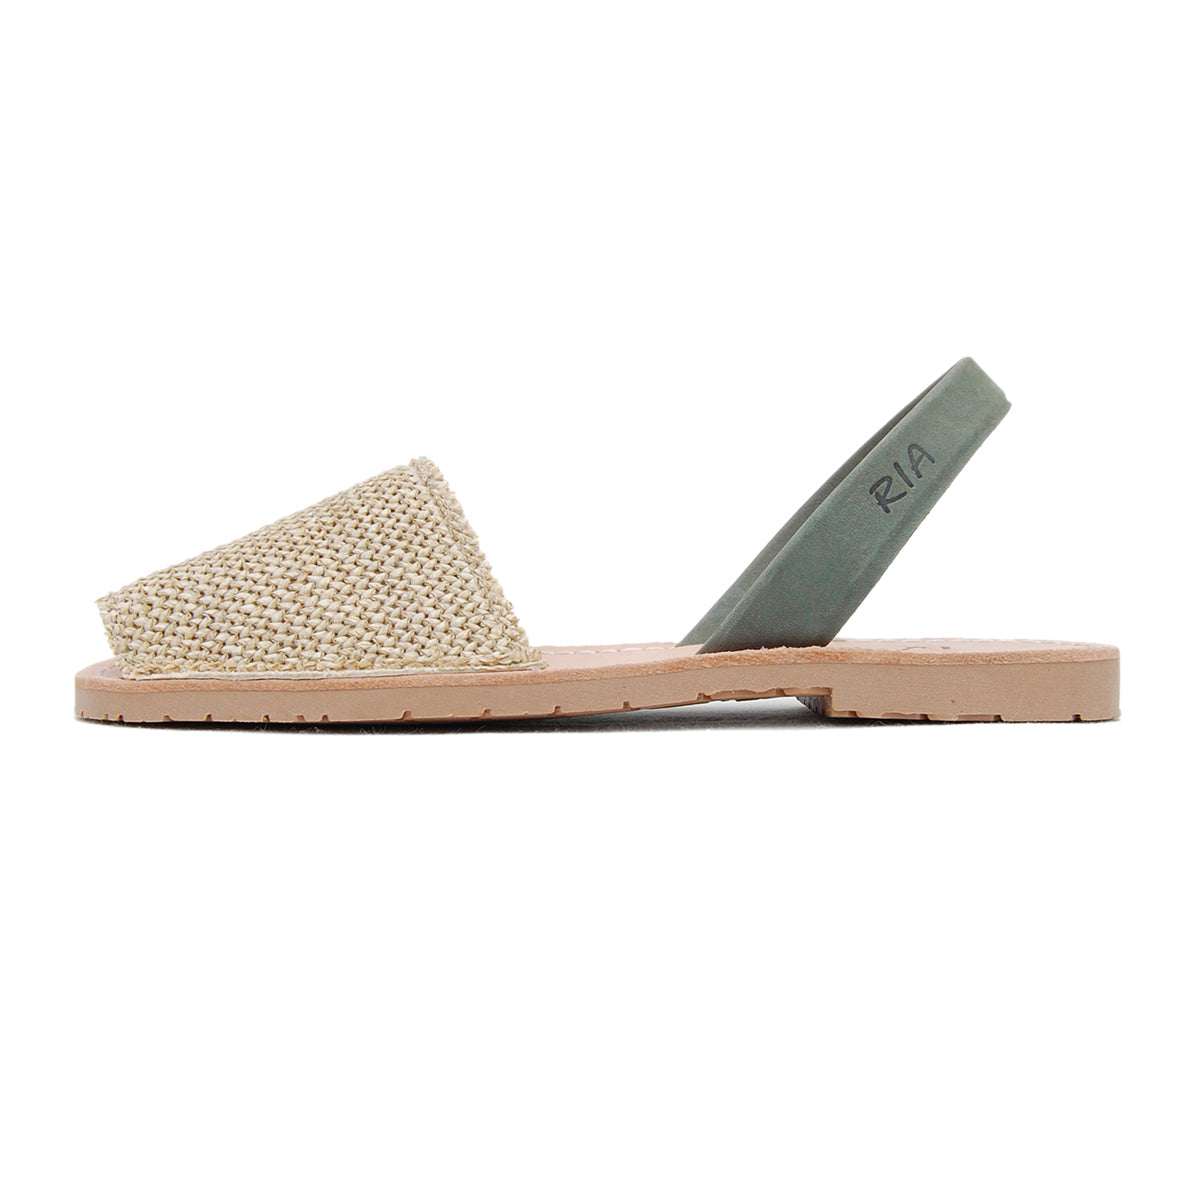 Roba Avarcas Sandals in Natural